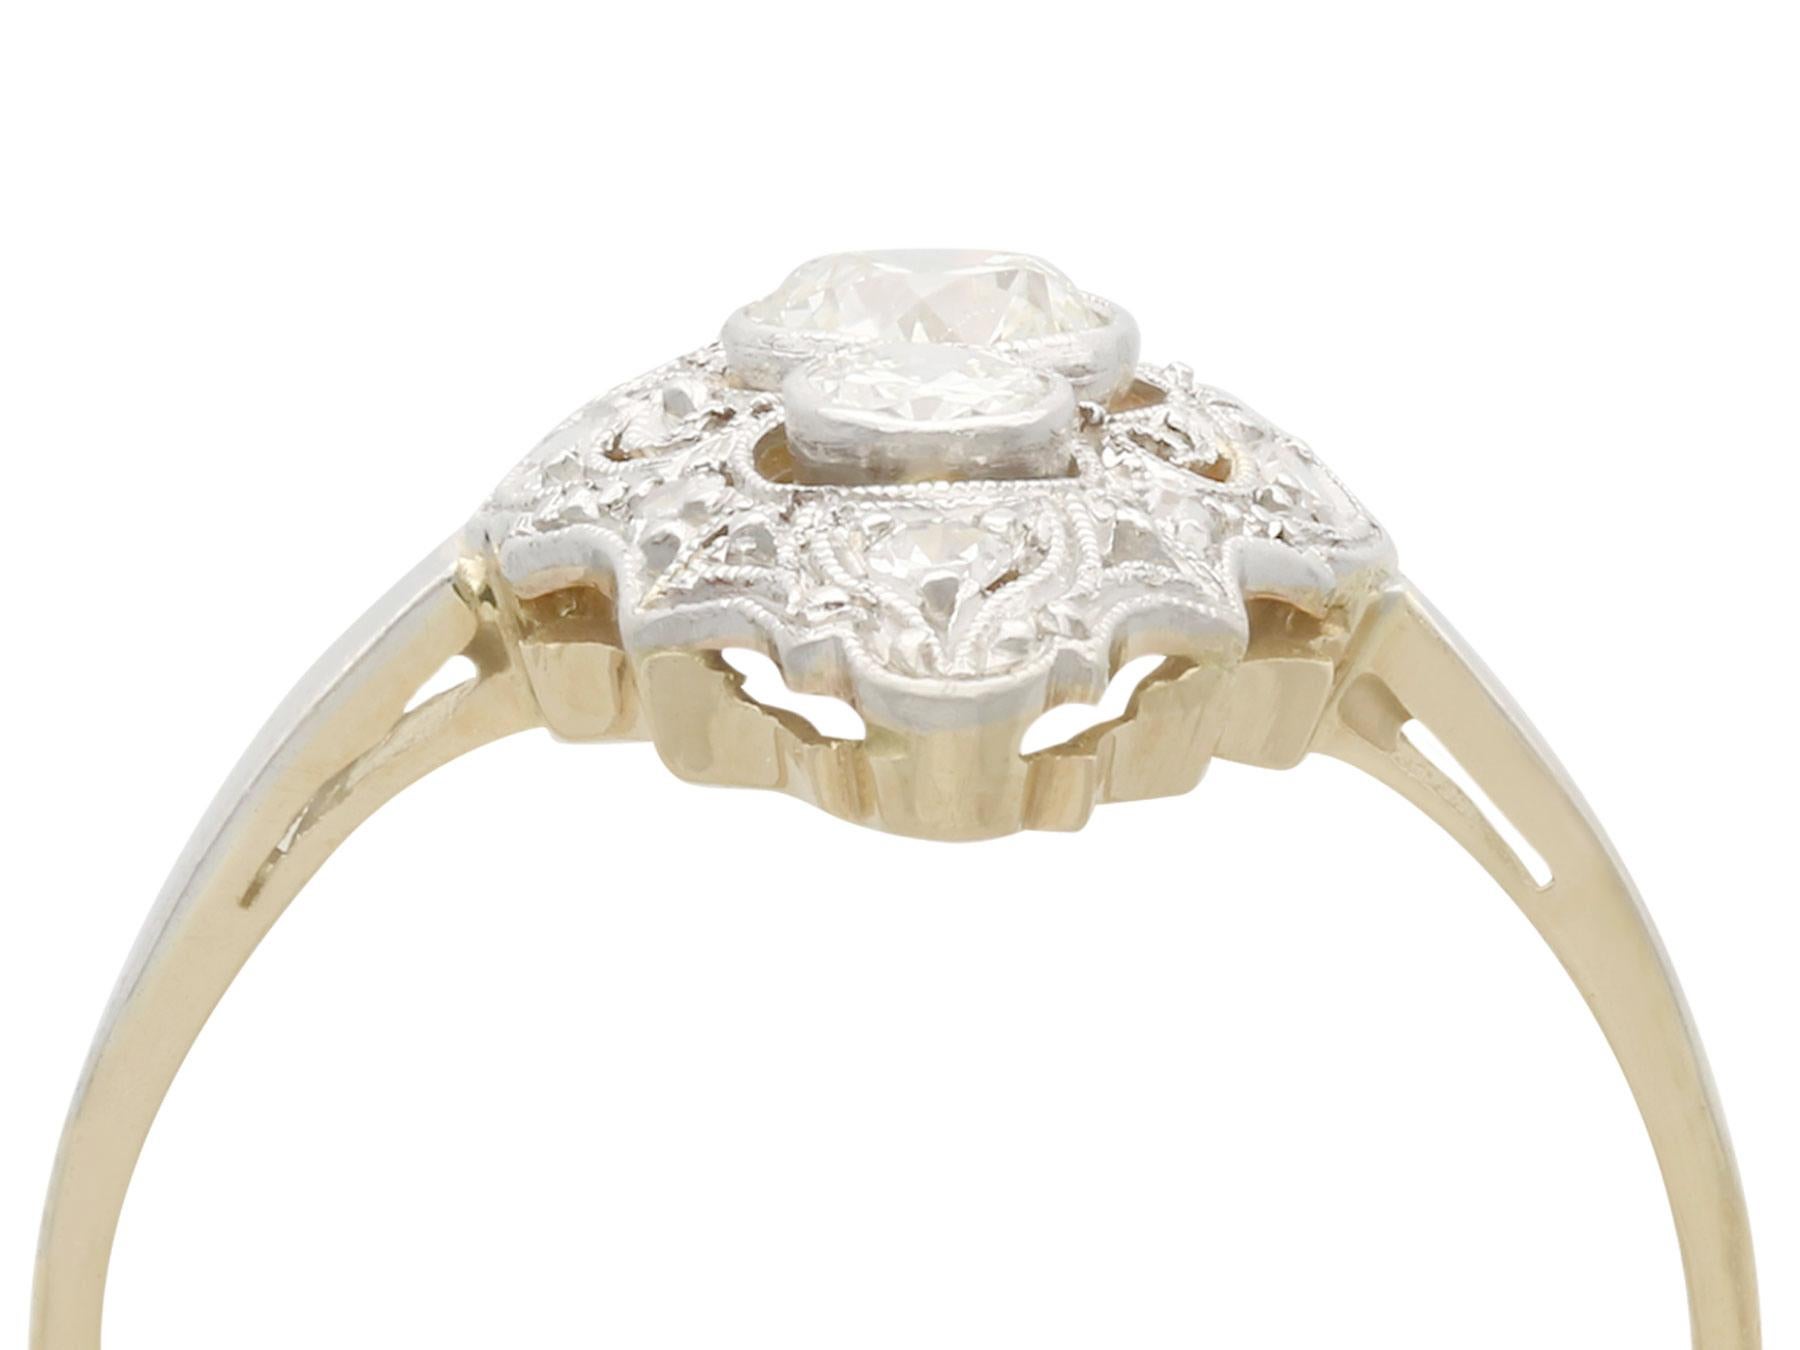 A stunning antique 0.60 carat and 18 carat yellow gold, 18 karat white gold set marquise shaped dress ring; part of our diverse antique jewelry collections.

This stunning, fine and impressive marquise shaped dress ring has been crafted in 18k